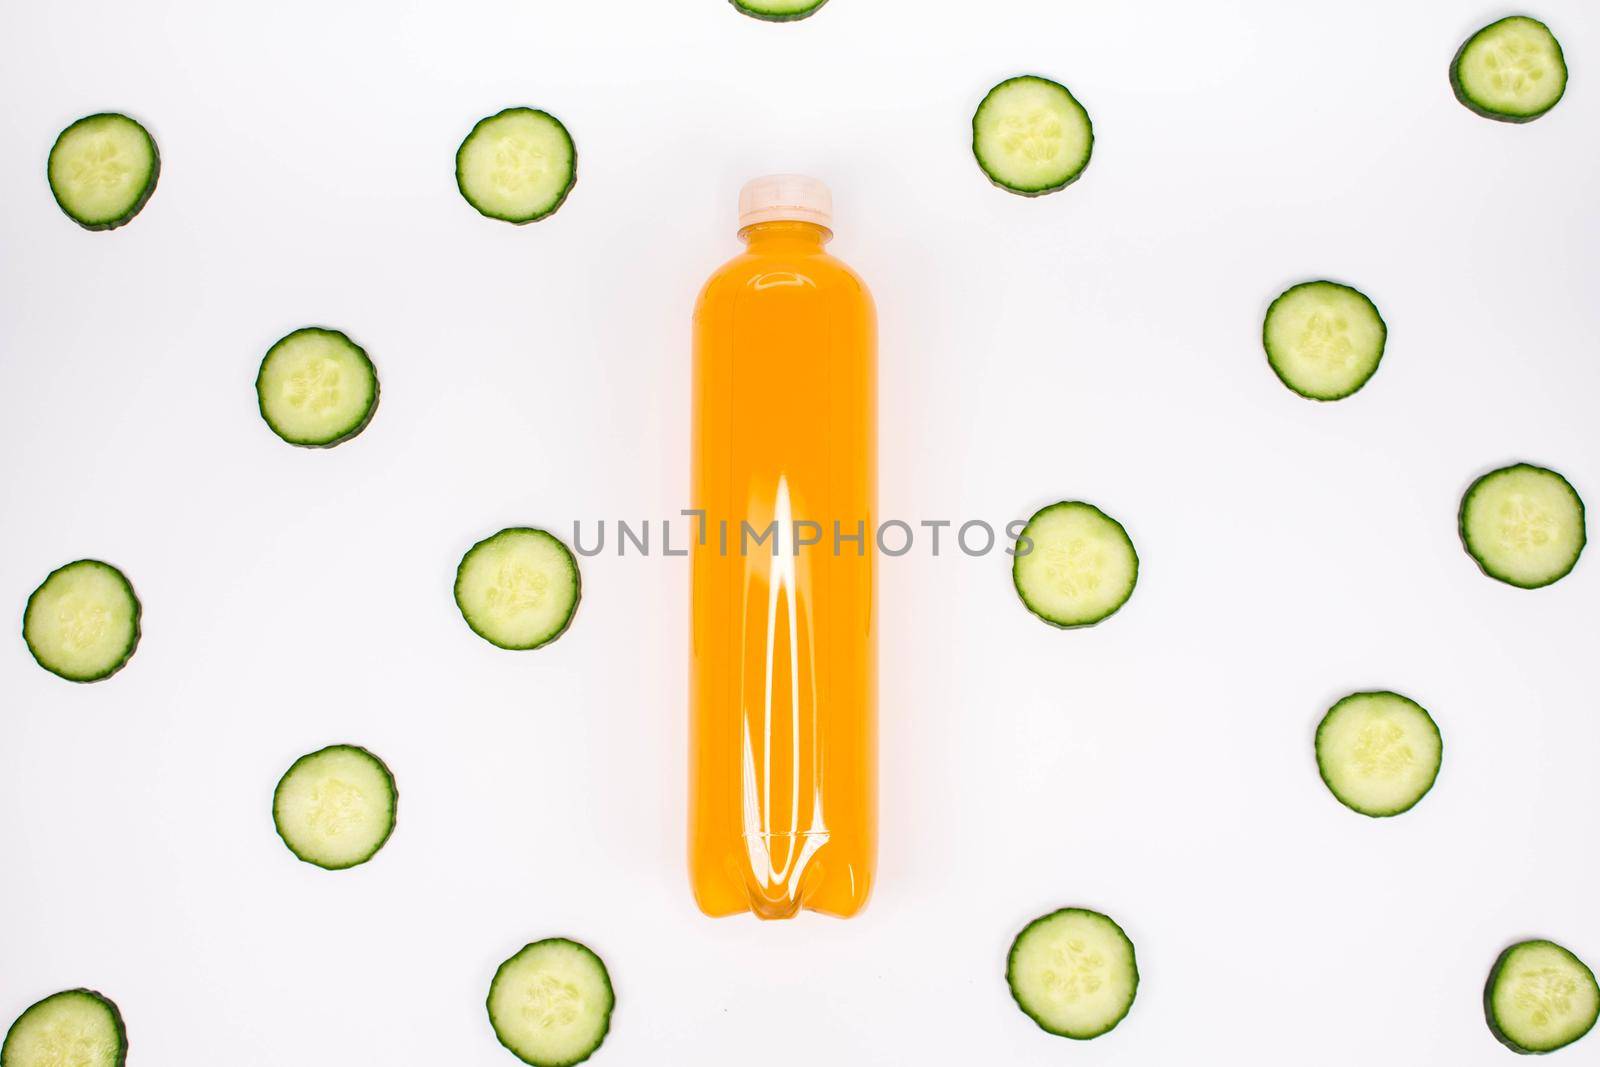 Bottle of orange smoothie on white background with cucumber pattern. Top view. Sweet drink. Detox summer drink. Healthy fresh juice bottle. Vegan and vegetarian concept. by JuliaDorian